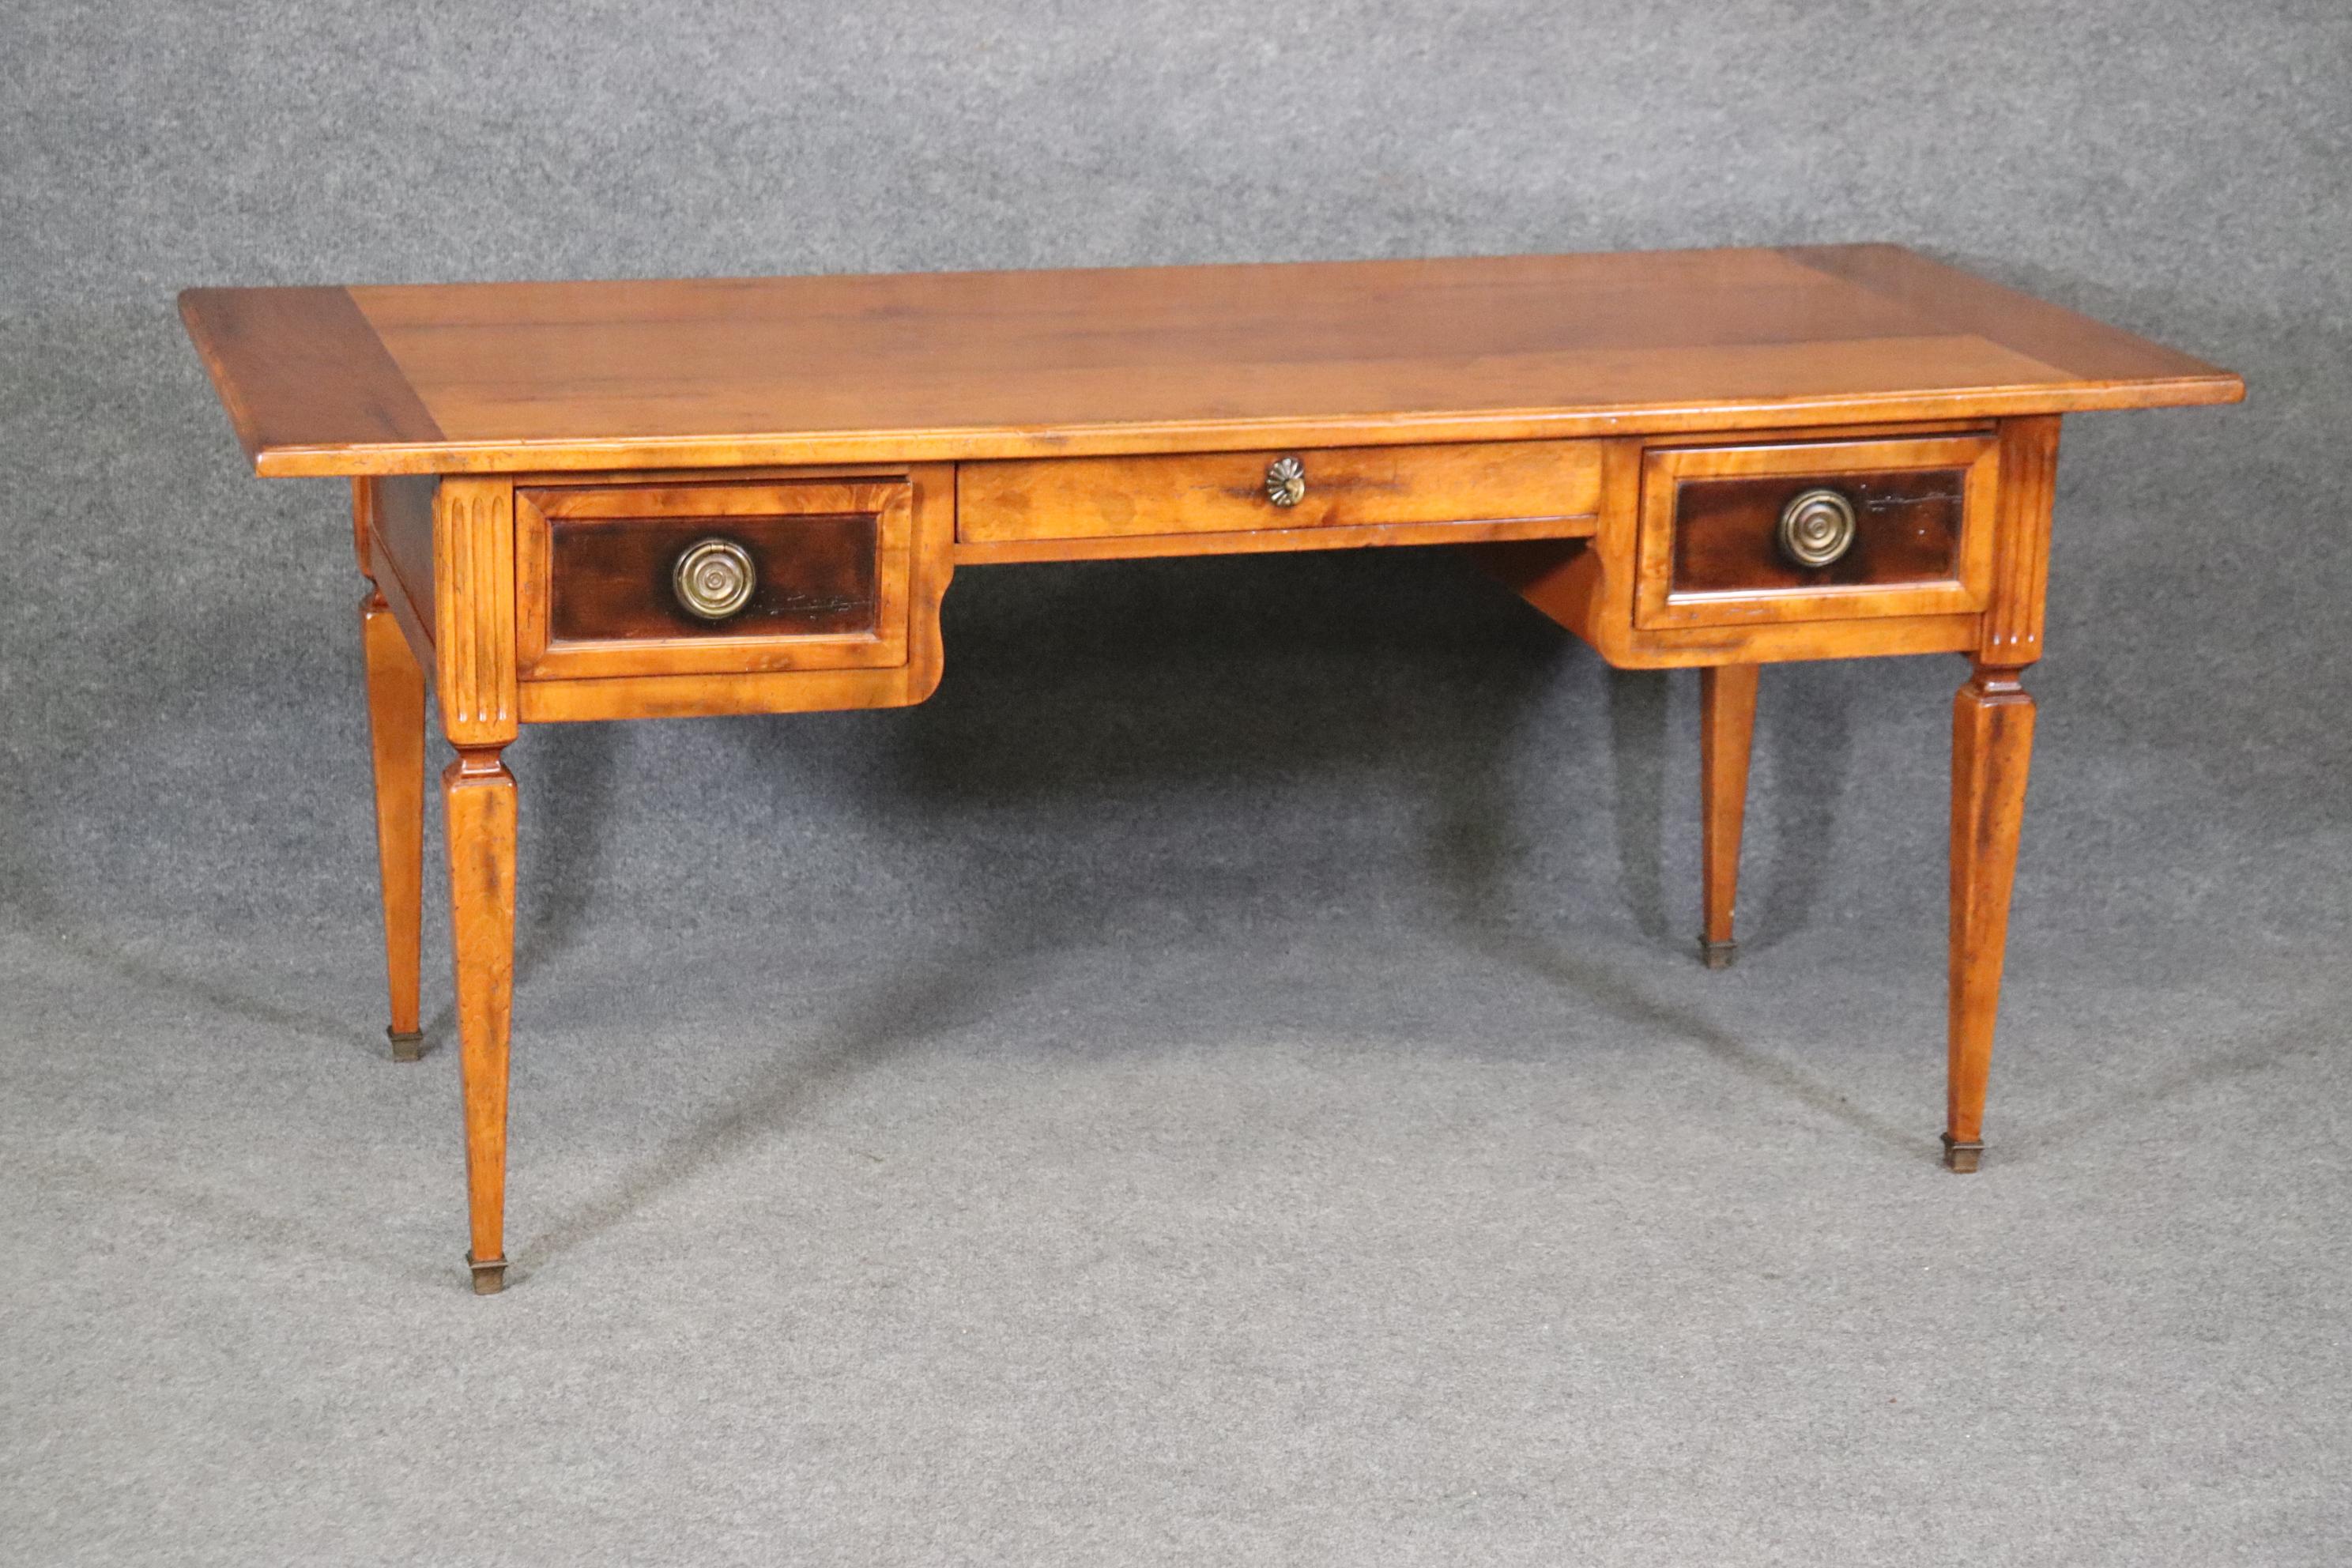 French Provincial Walnut Milling Road by Baker Furniture Italian Provincial Writing Table Desk 